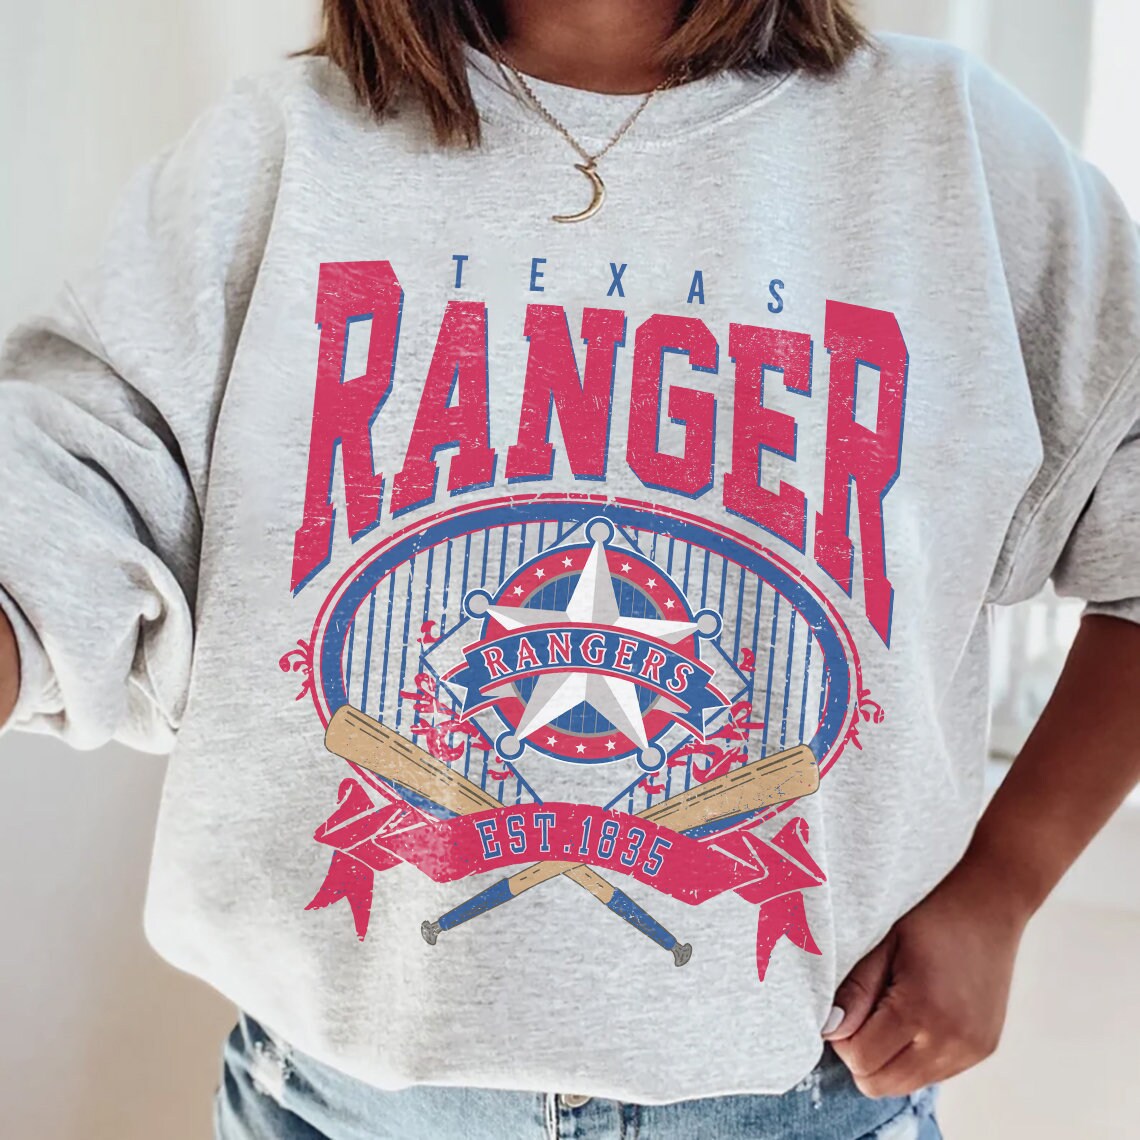 Holiday gift ideas for Texas Rangers fans including uniform swag